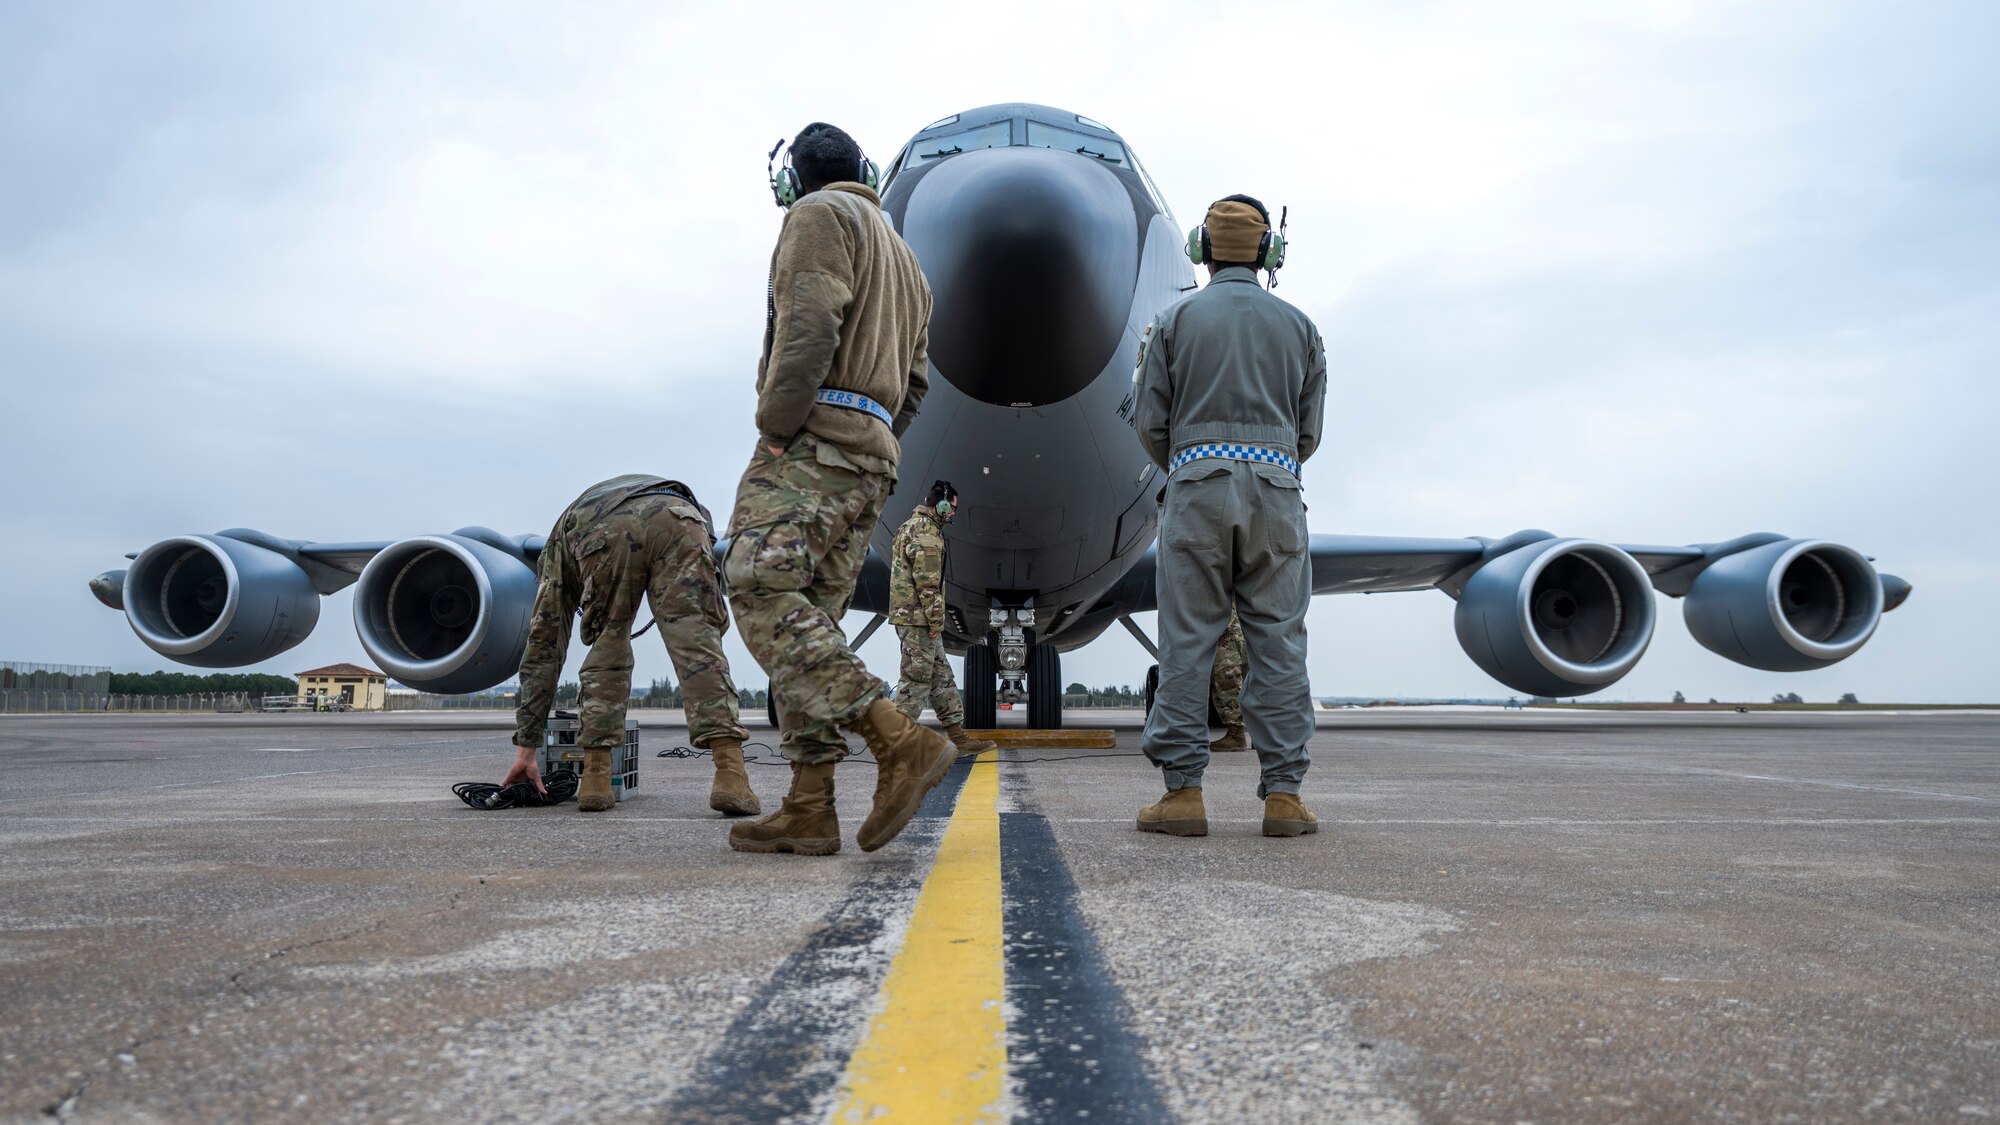 Airmen assigned to the 384th Expeditionary Air Refueling Squadron and the 55th Expeditionary Fighter Generation Squadron refuel a KC-135 Stratotanker at Incirlik Air Base, Turkey, Feb. 3, 2022. The 384th EARS trained the 55th EFGS as part of an Agile Combat Employment event, enabling Airmen to operate from various locations and deliver lethal combat power across the spectrum of military operations.